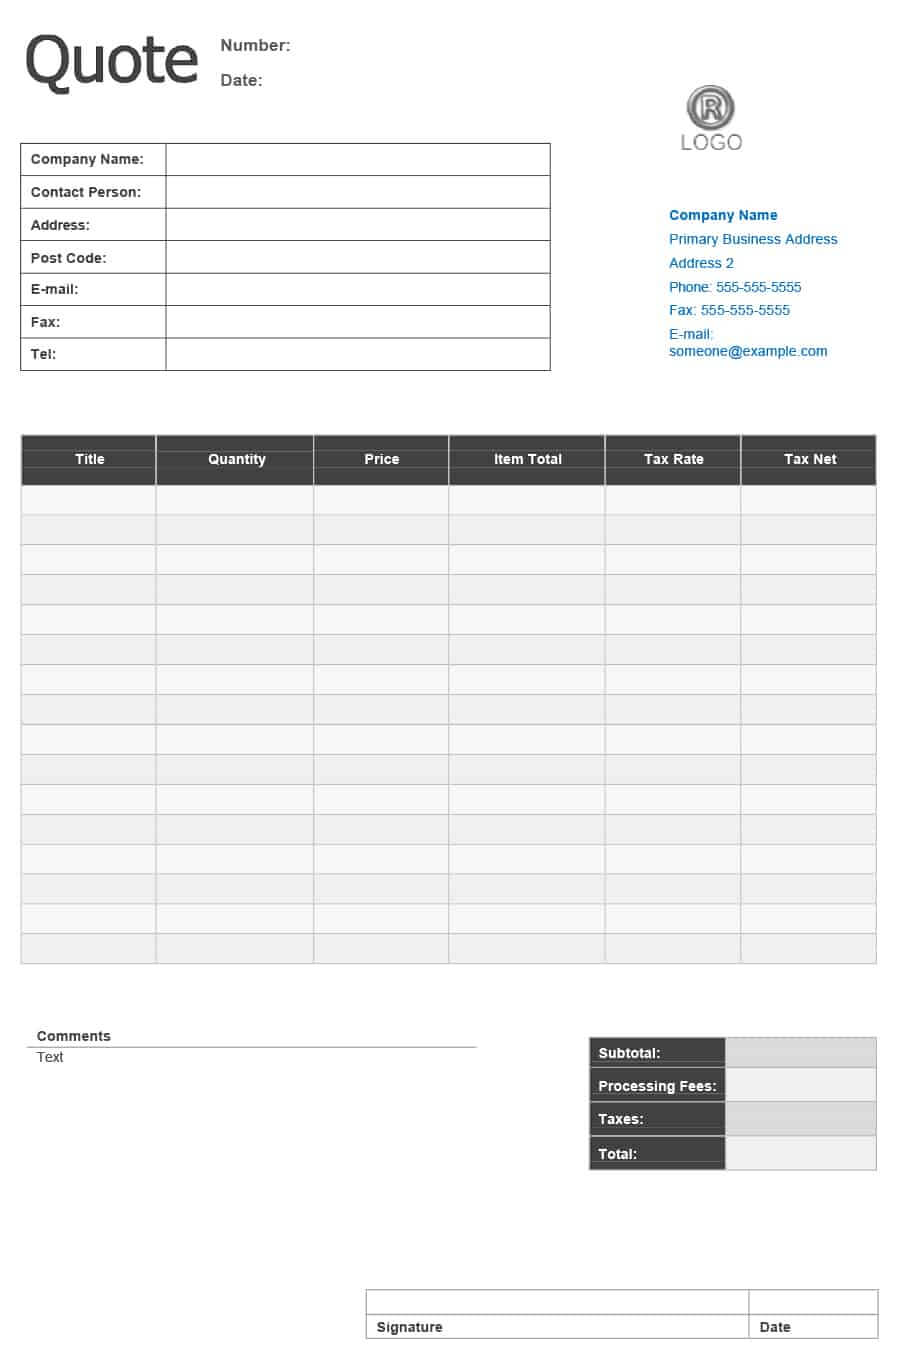 47 Professional Quote Templates (100% Free Download) ᐅ Pertaining To Blank Estimate Form Template